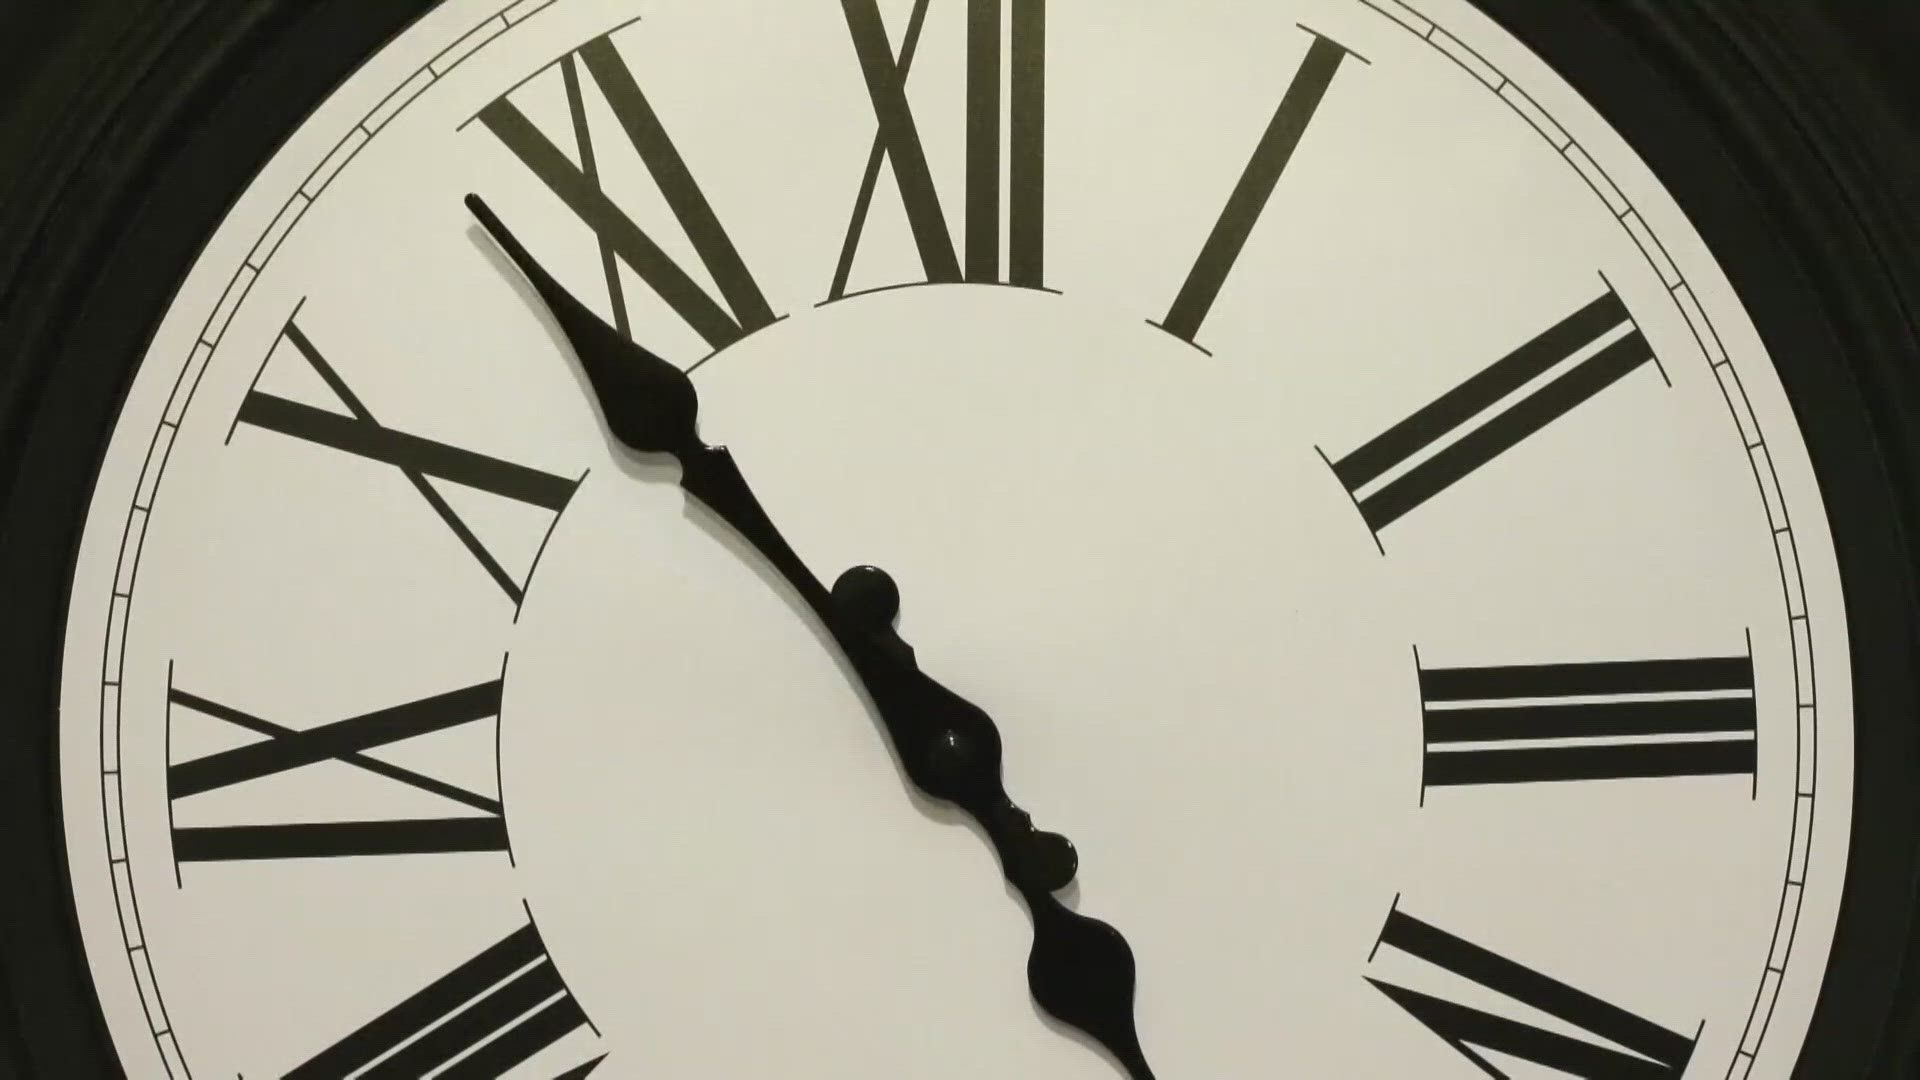 Daylight-saving time: Don't touch that clock in Arizona